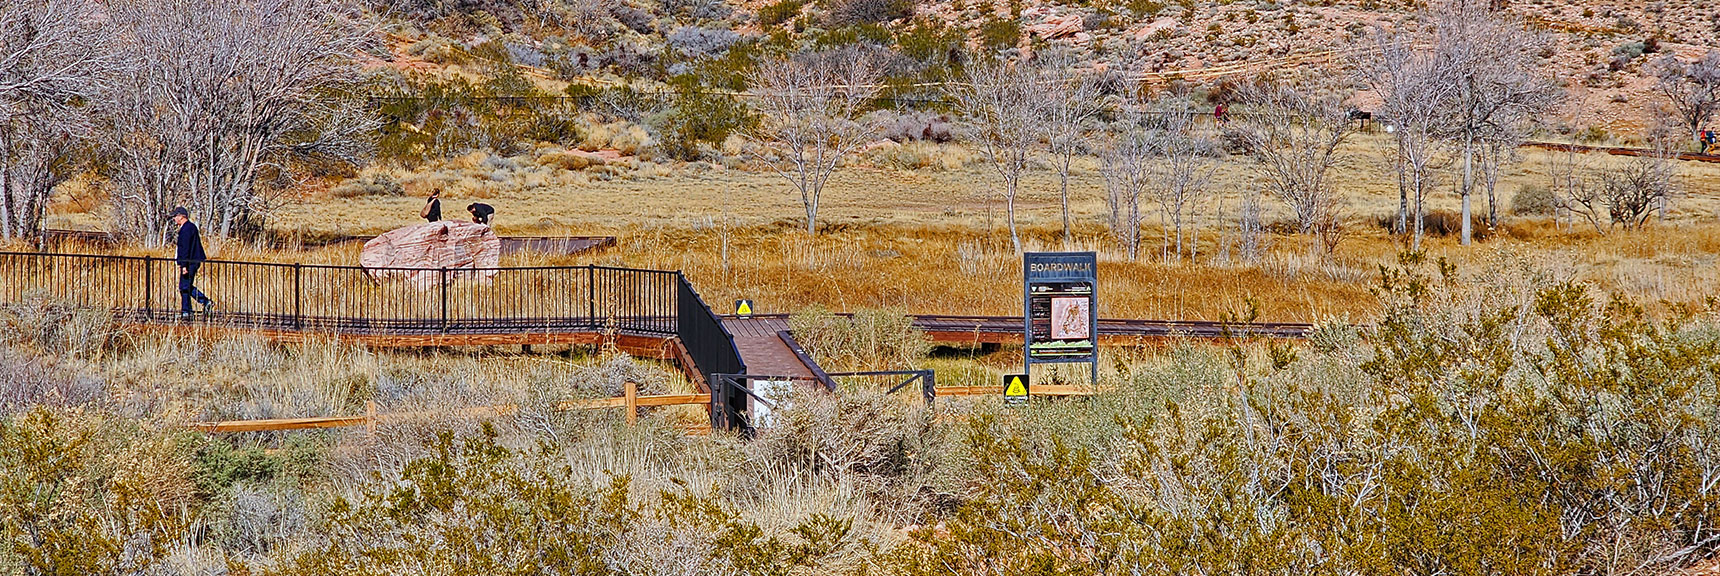 Descend from Red Spring Ridge to the Boardwalk with Its Many Interpretive Displays. | Calico Basin Daily Workout Trails | Calico Basin, Nevada